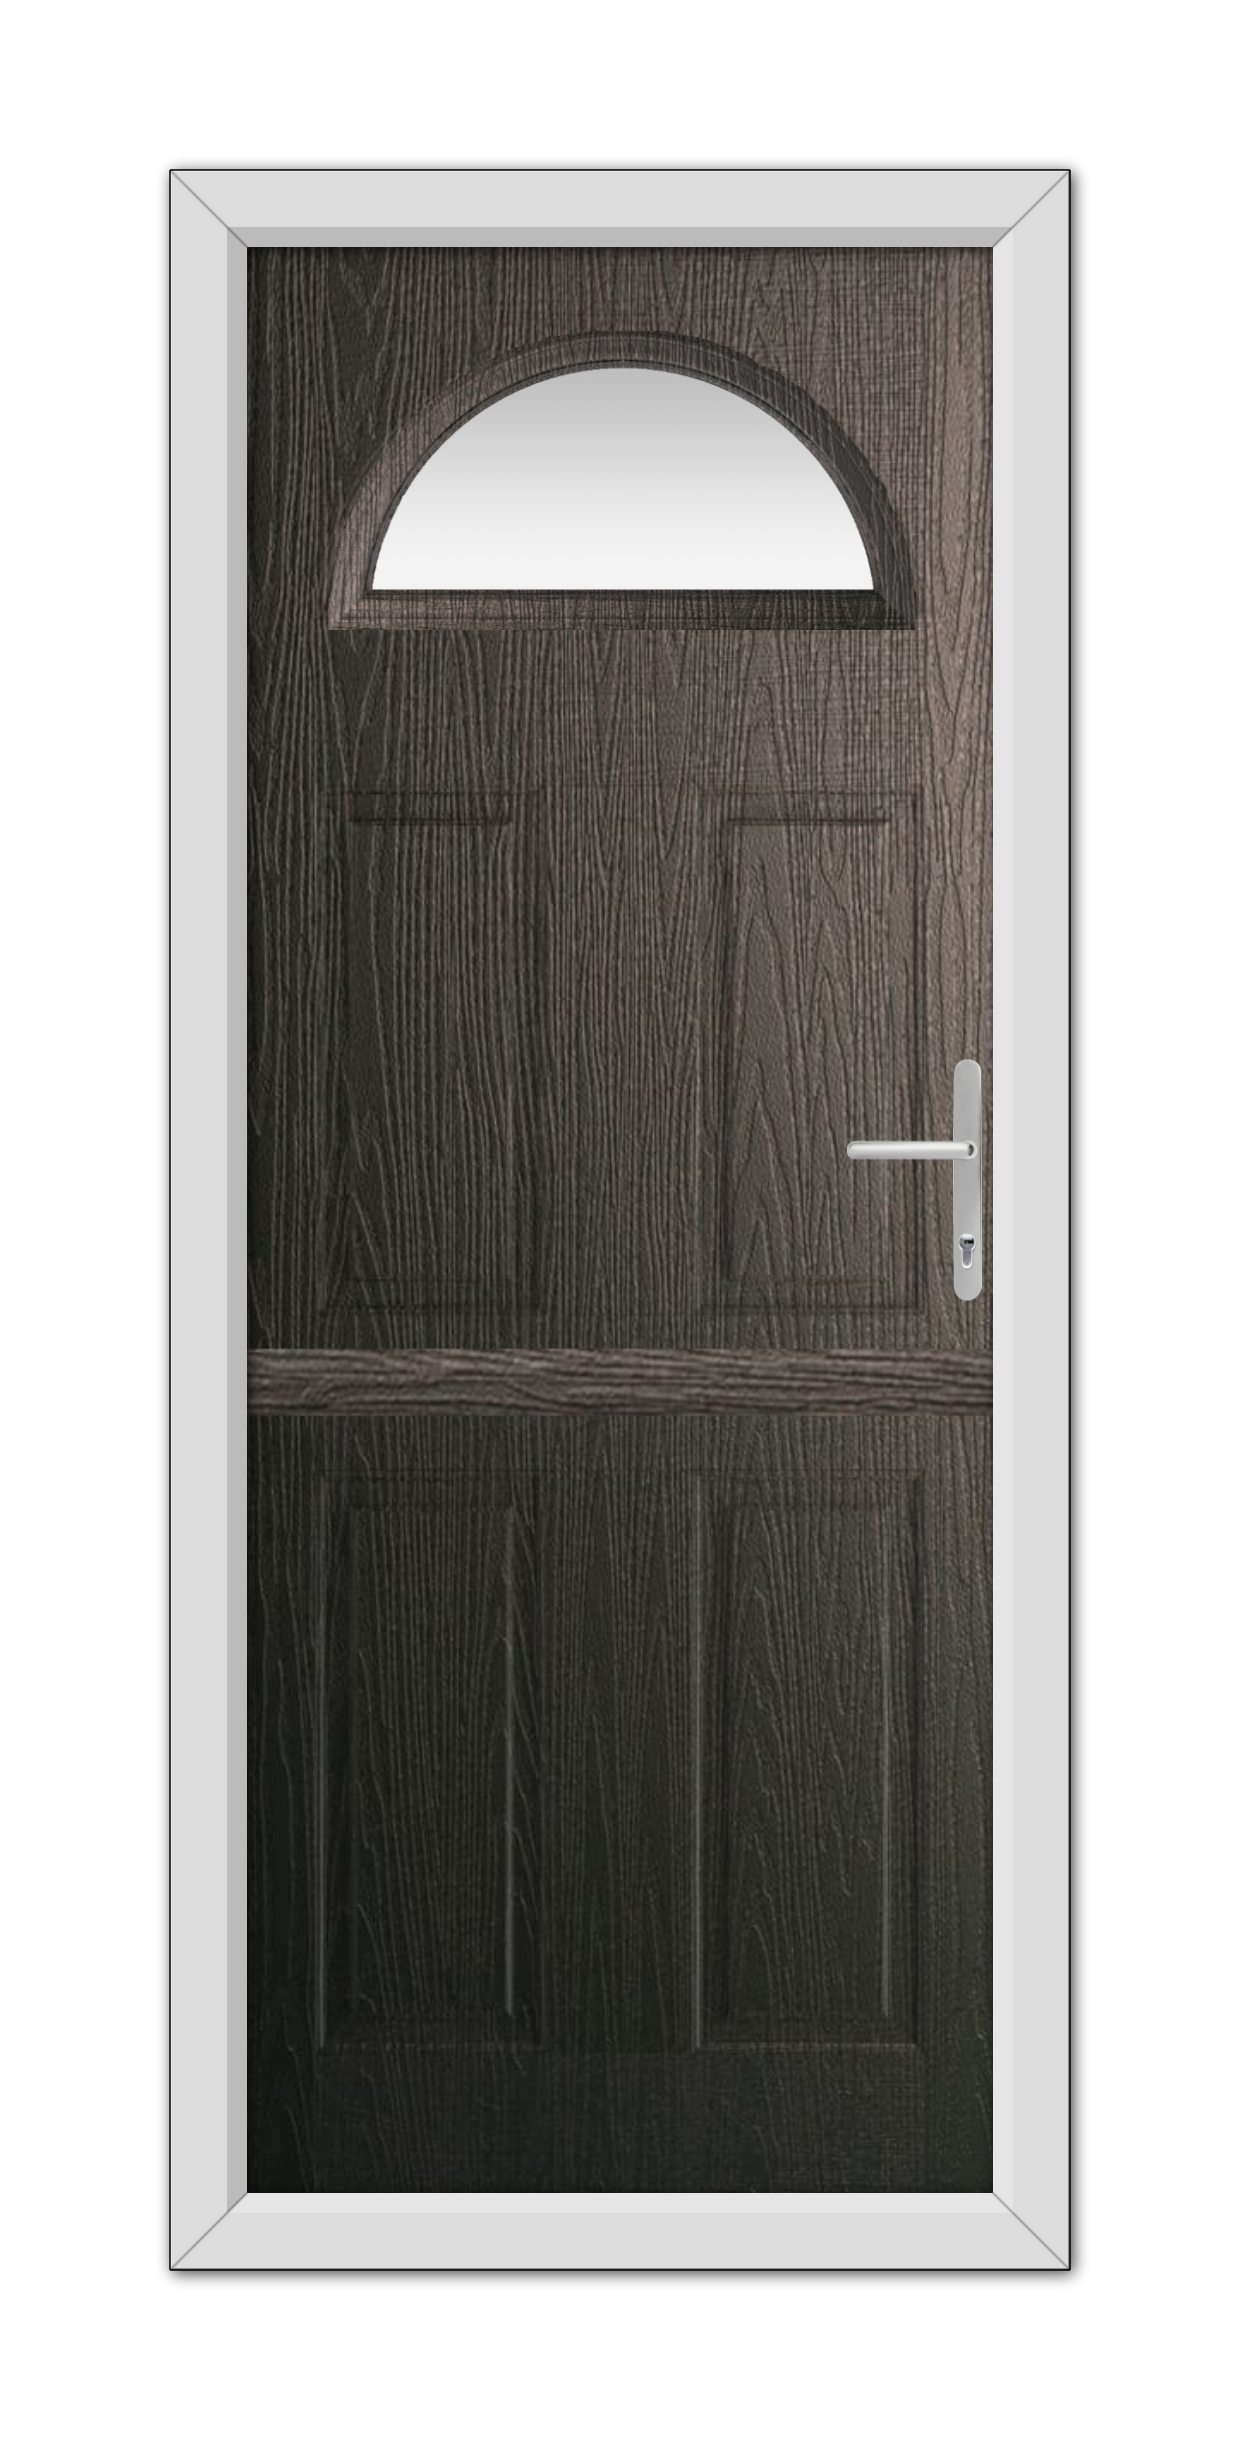 A modern Schwarzbraun Winslow 1 Stable Composite Door 48mm Timber Core with an arched window at the top, featuring a white frame and a metallic handle on the right side.